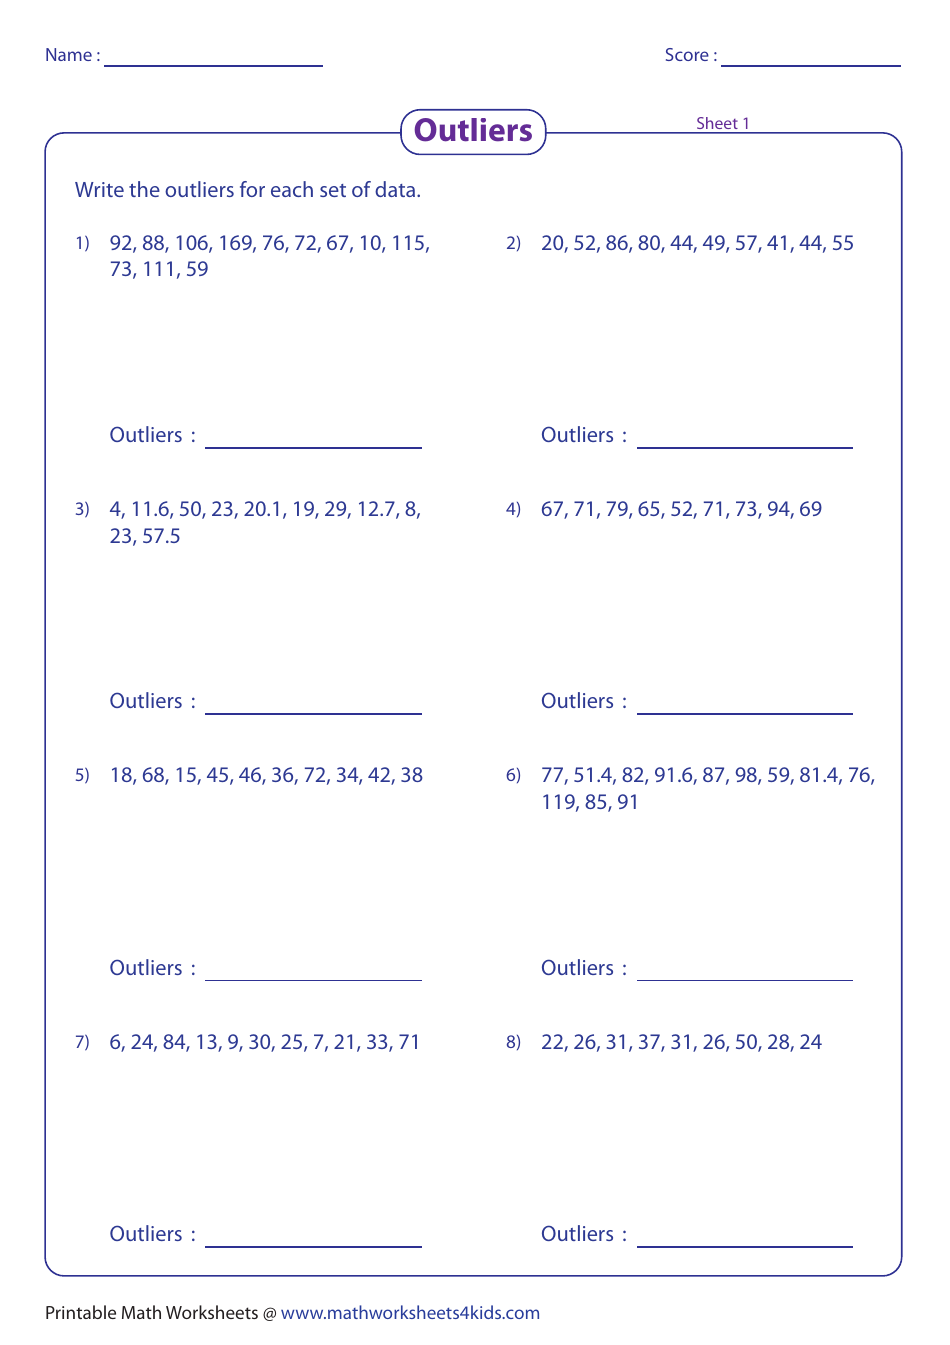 Effects Of An Outlier Worksheet Answer Key